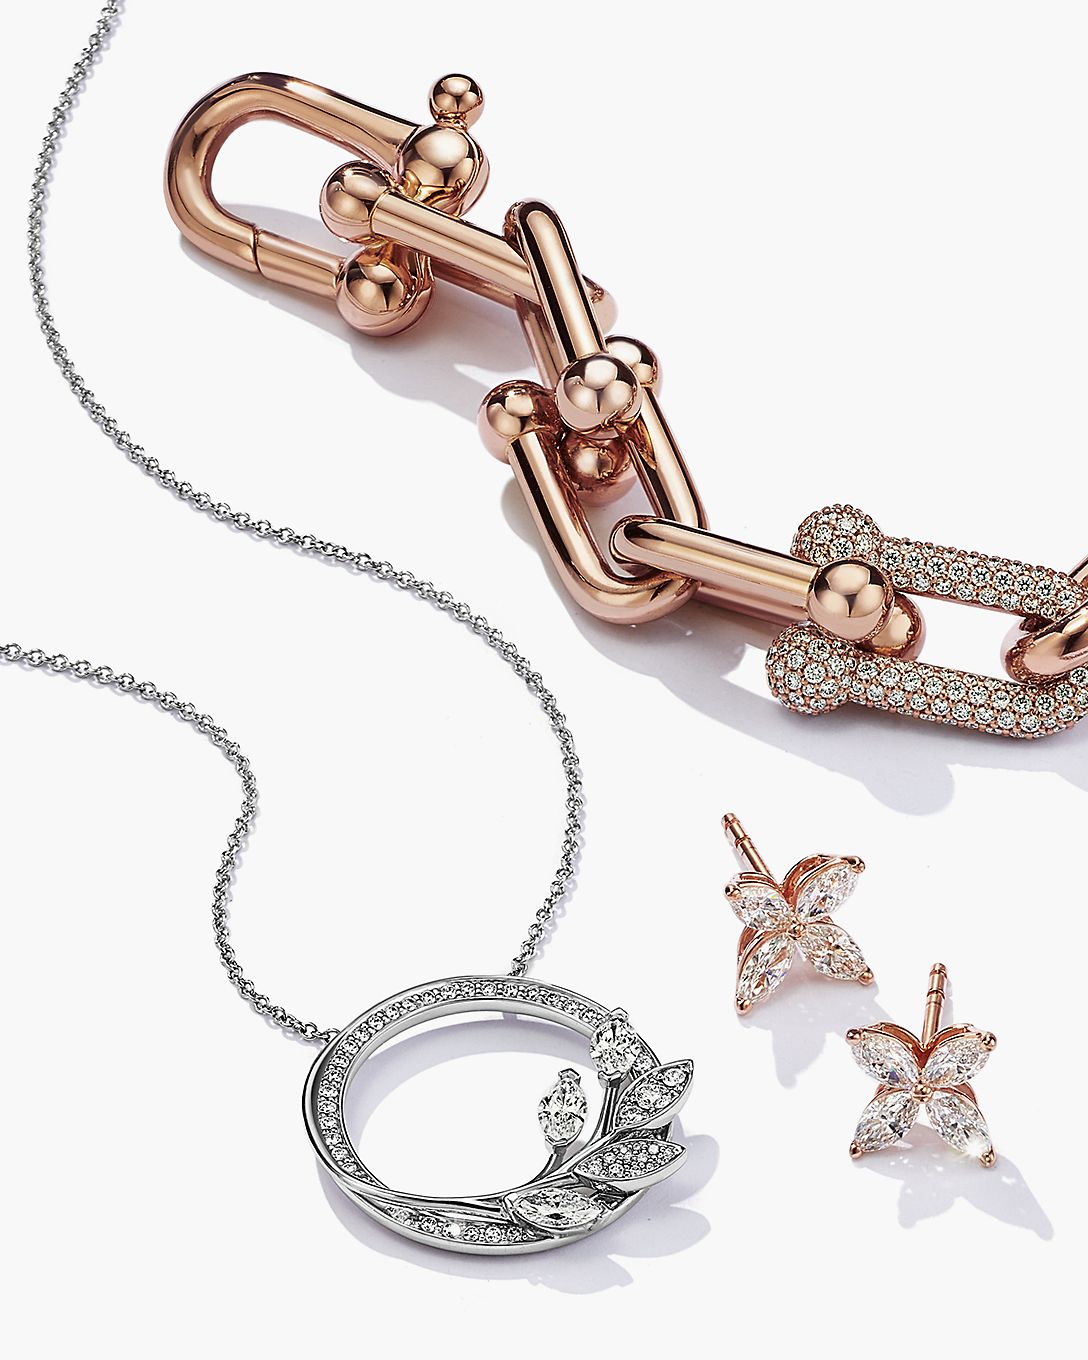 Luxury Gifts for Anniversaries & Holidays | Tiffany & Co.